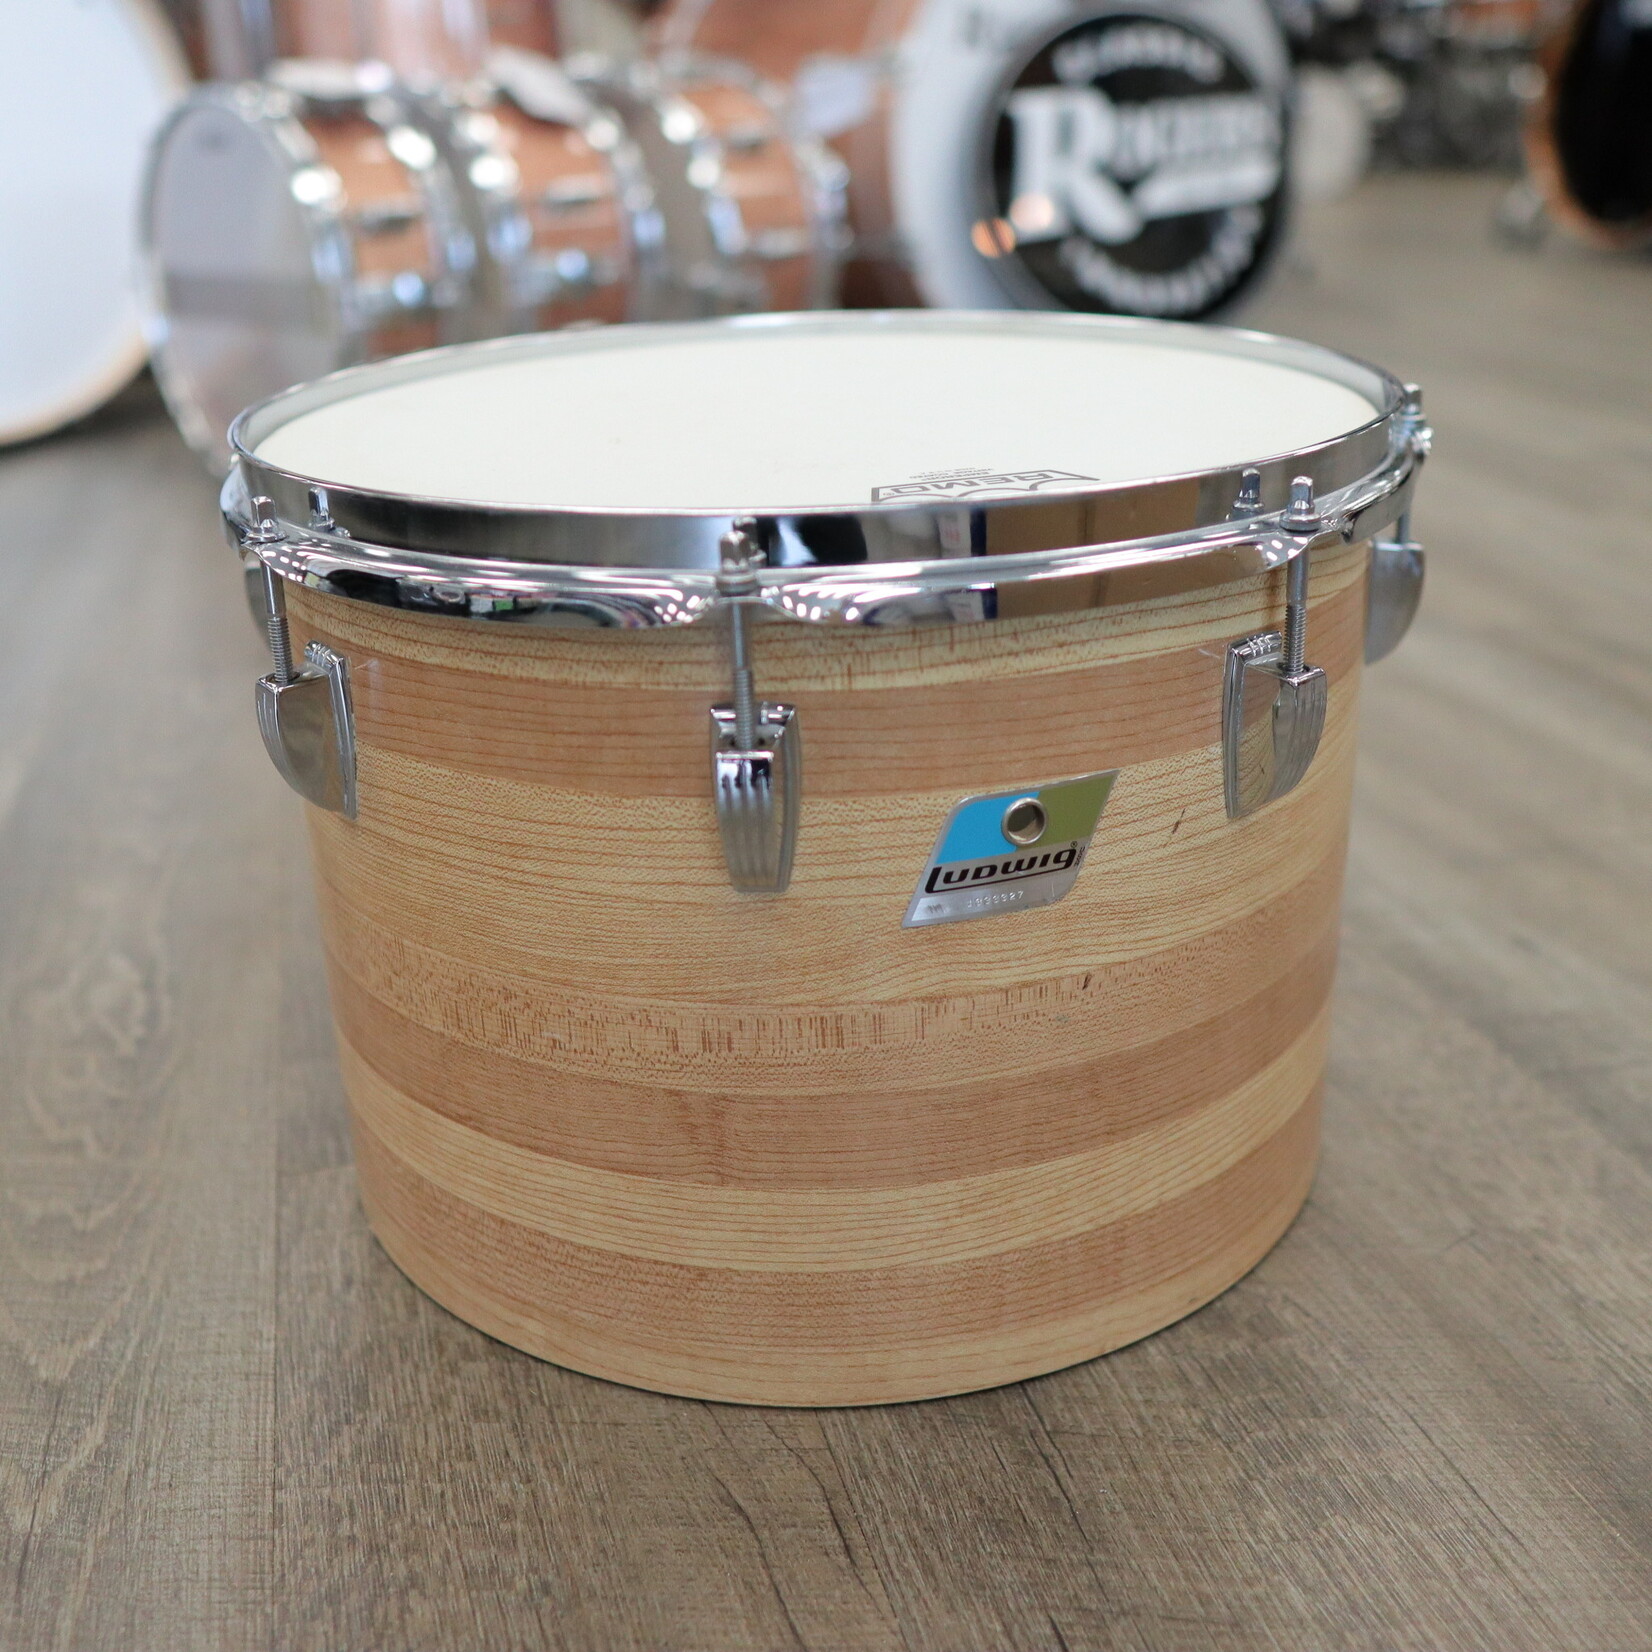 Ludwig 70s Ludwig 10x14" 3-Ply Concert Tom Blue/Olive Pointy Badge (Butcher Block)